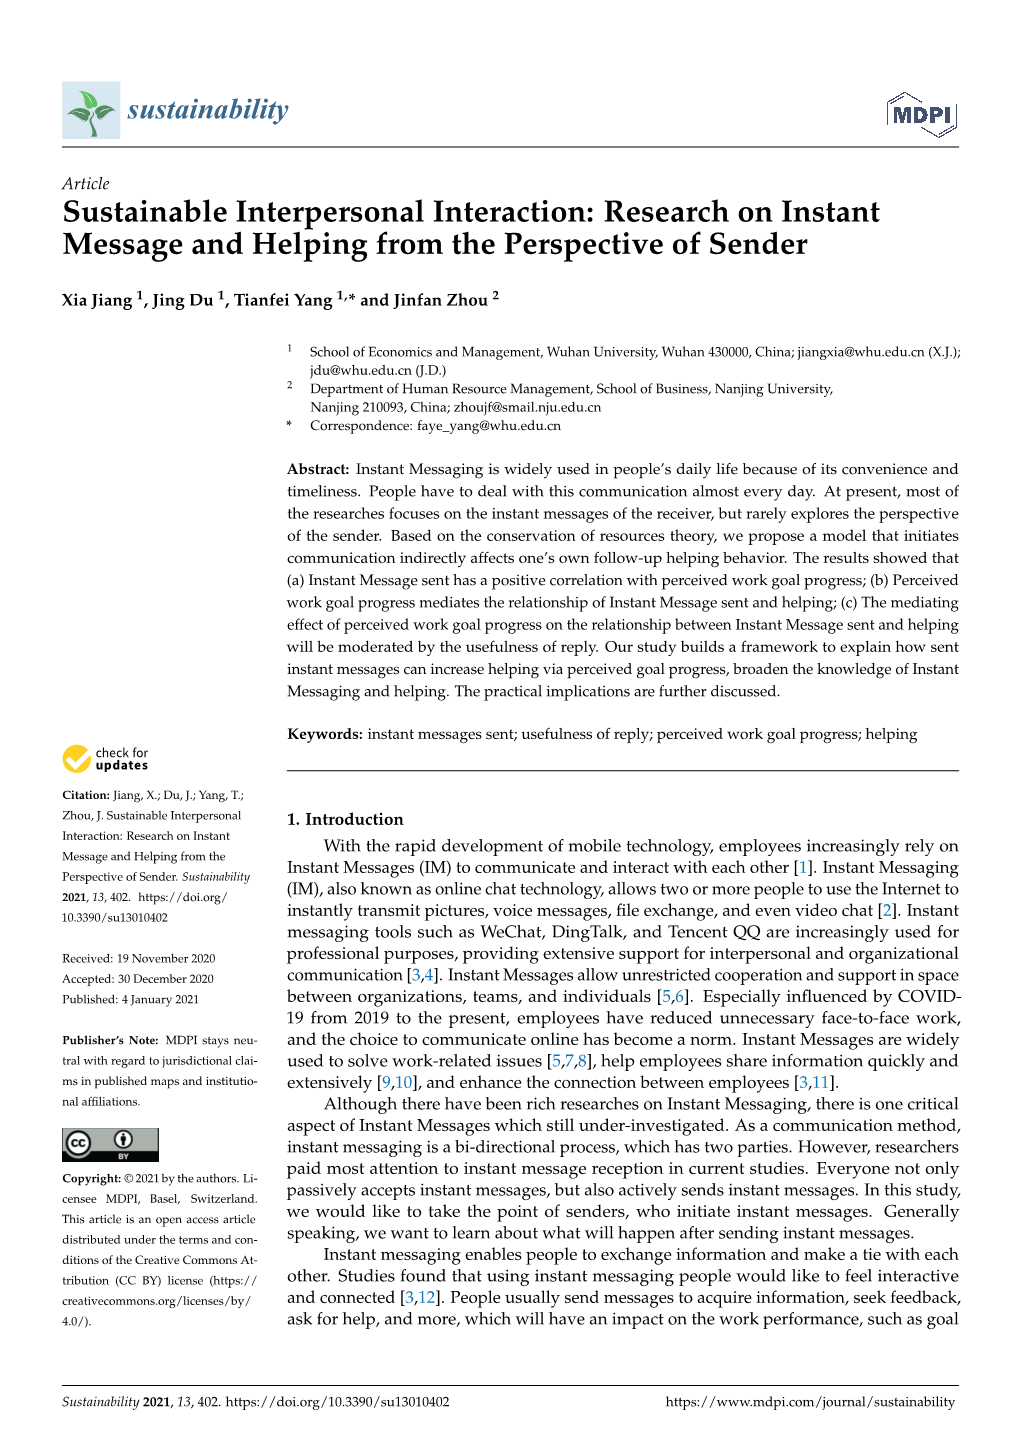 Sustainable Interpersonal Interaction: Research on Instant Message and Helping from the Perspective of Sender